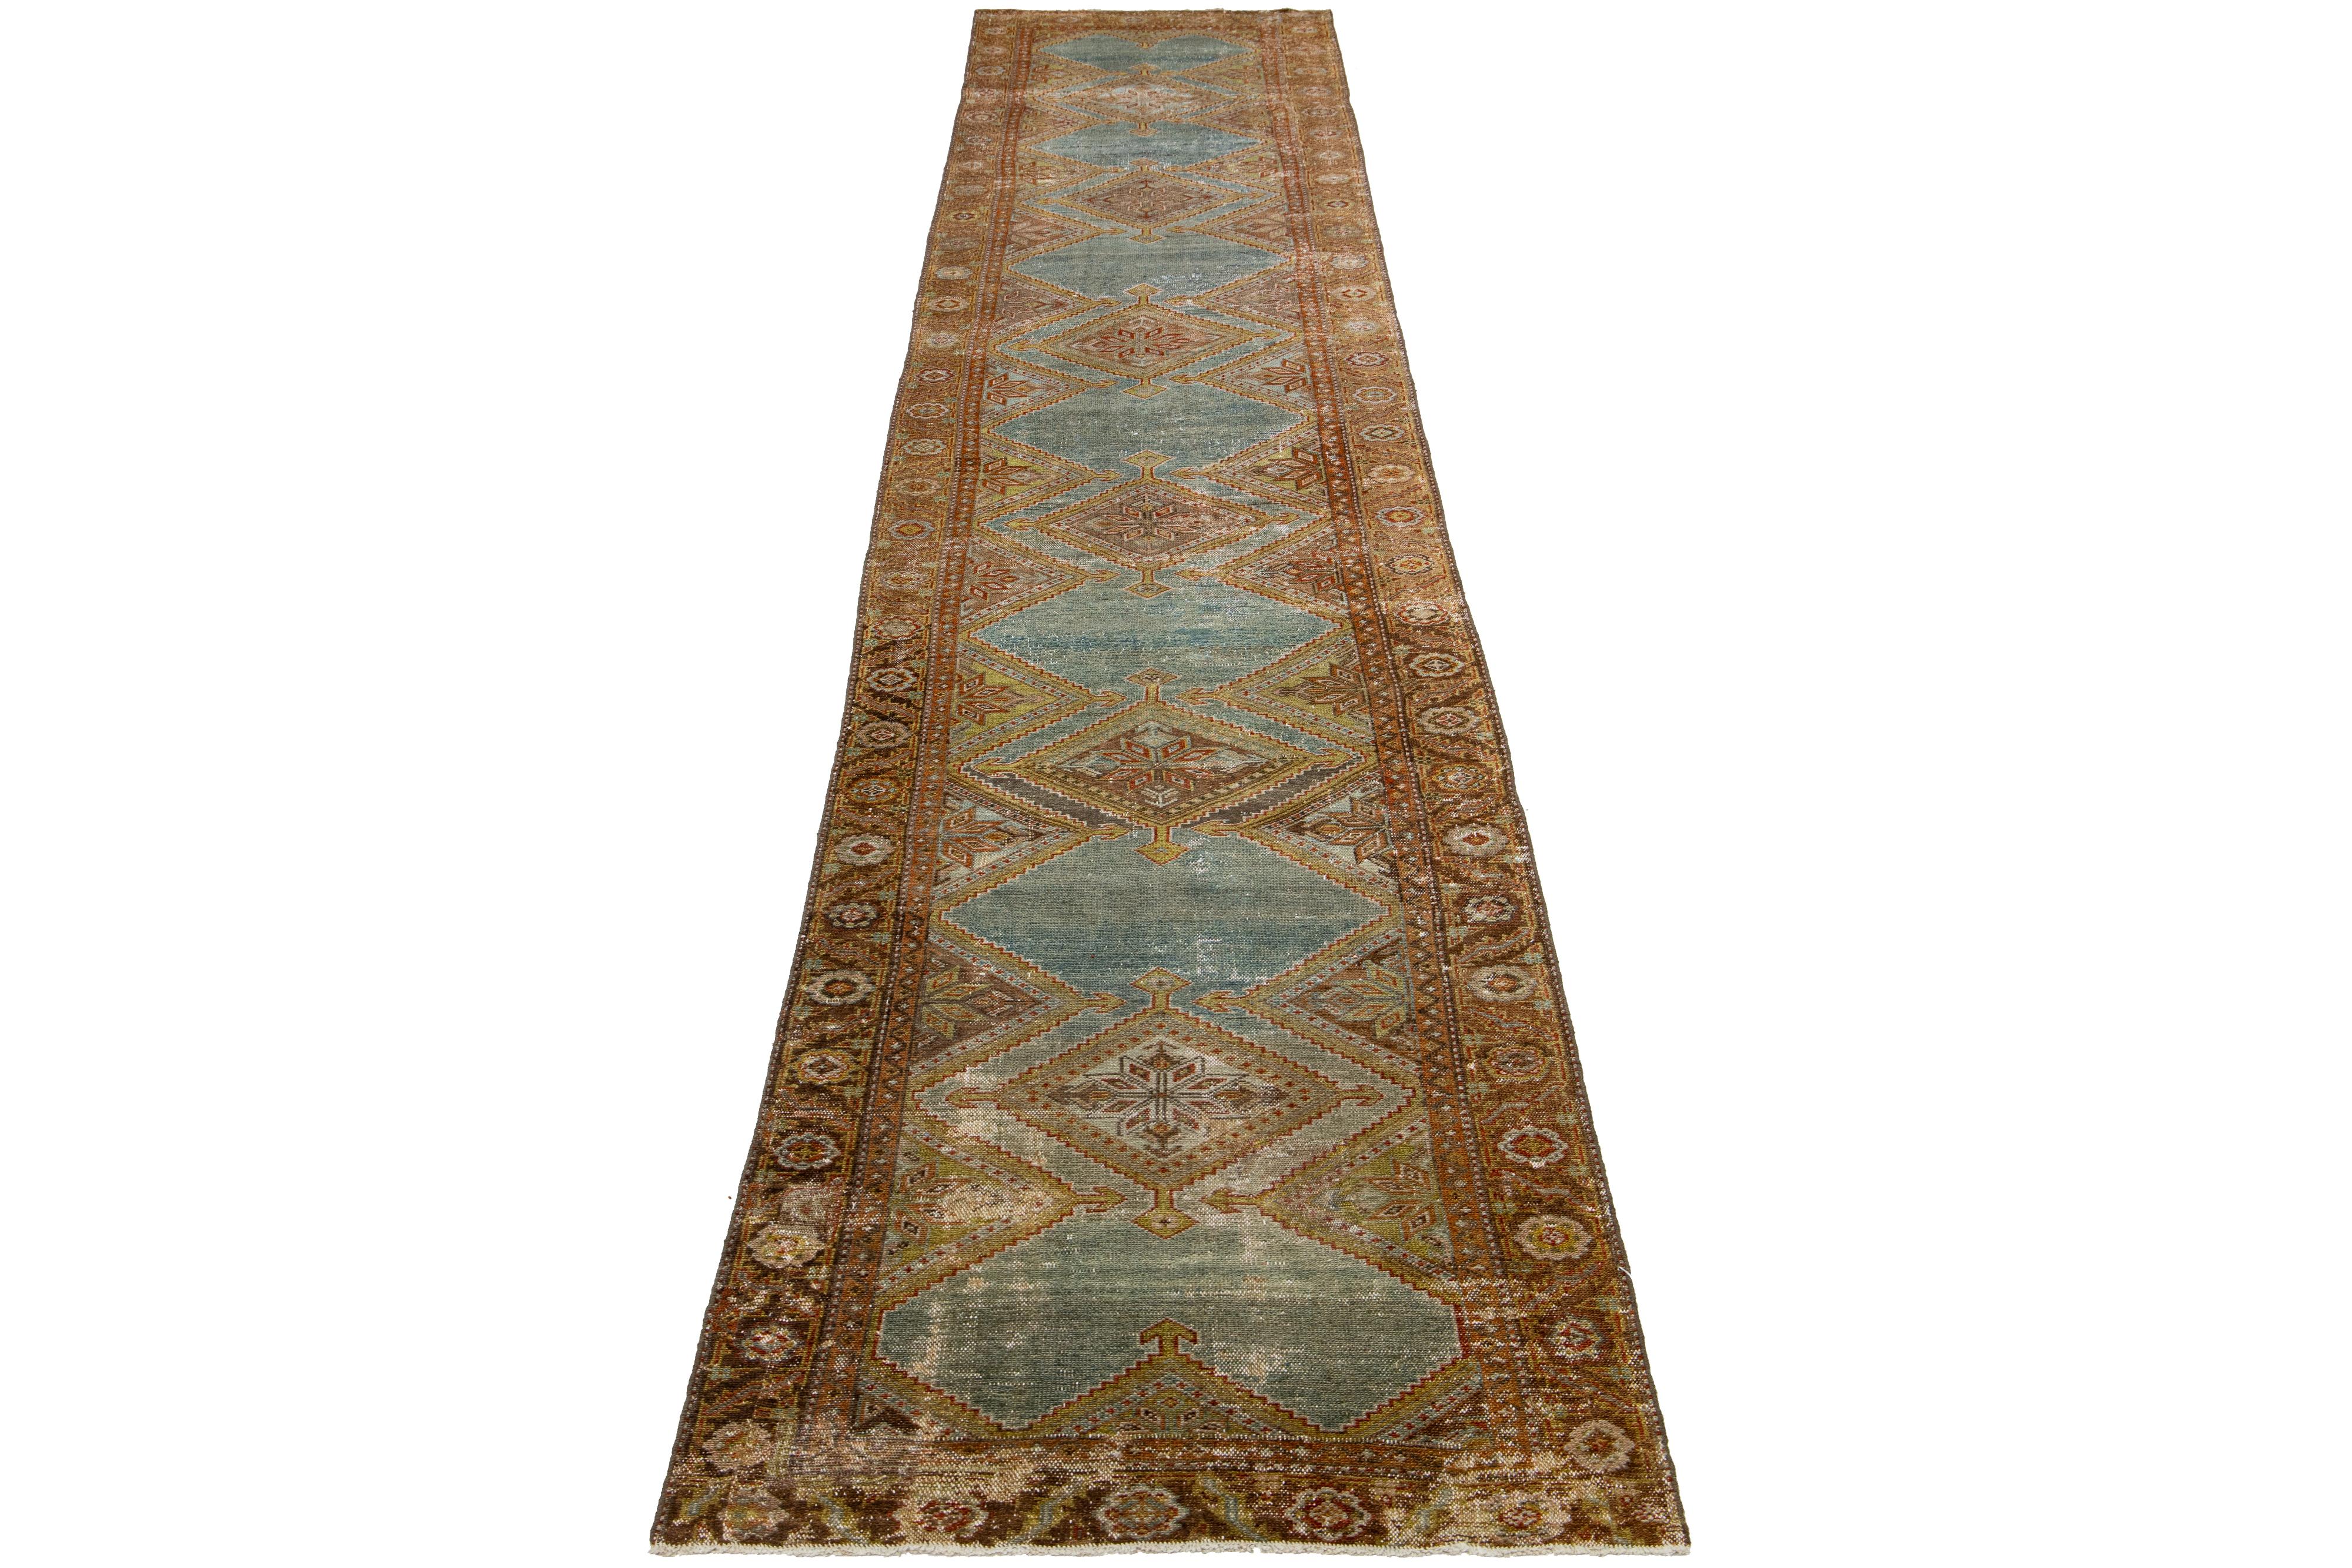 The Persian Malayer wool rug exudes an antique elegance with its hand-knotted wool construction. Its blue field is beautifully decorated with a tribal pattern highlighted by rust accents.

This rug measures 3'2